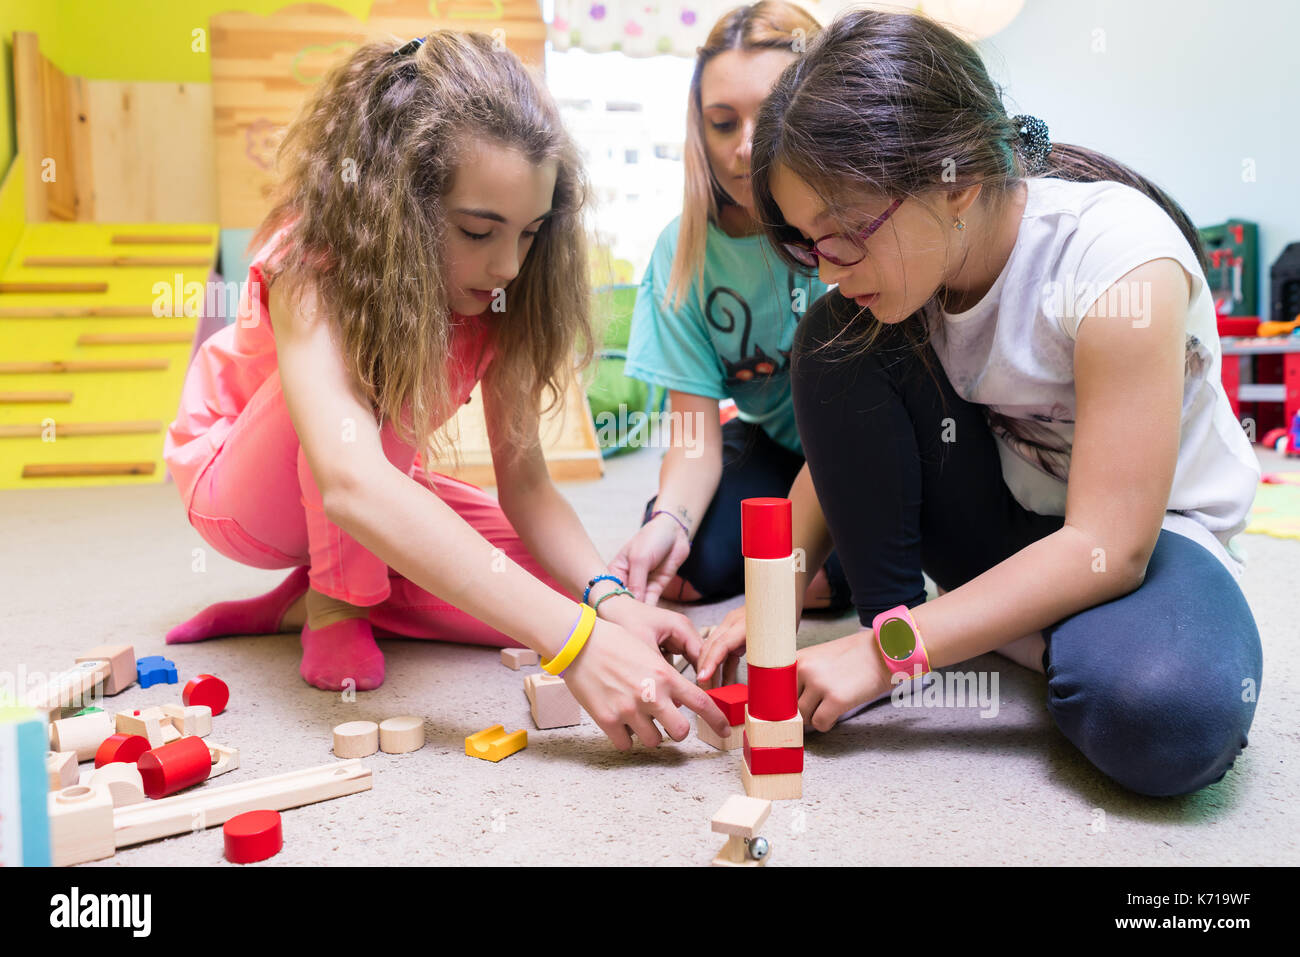 Two girls playing together with wooden toy blocks on the floor d Stock Photo